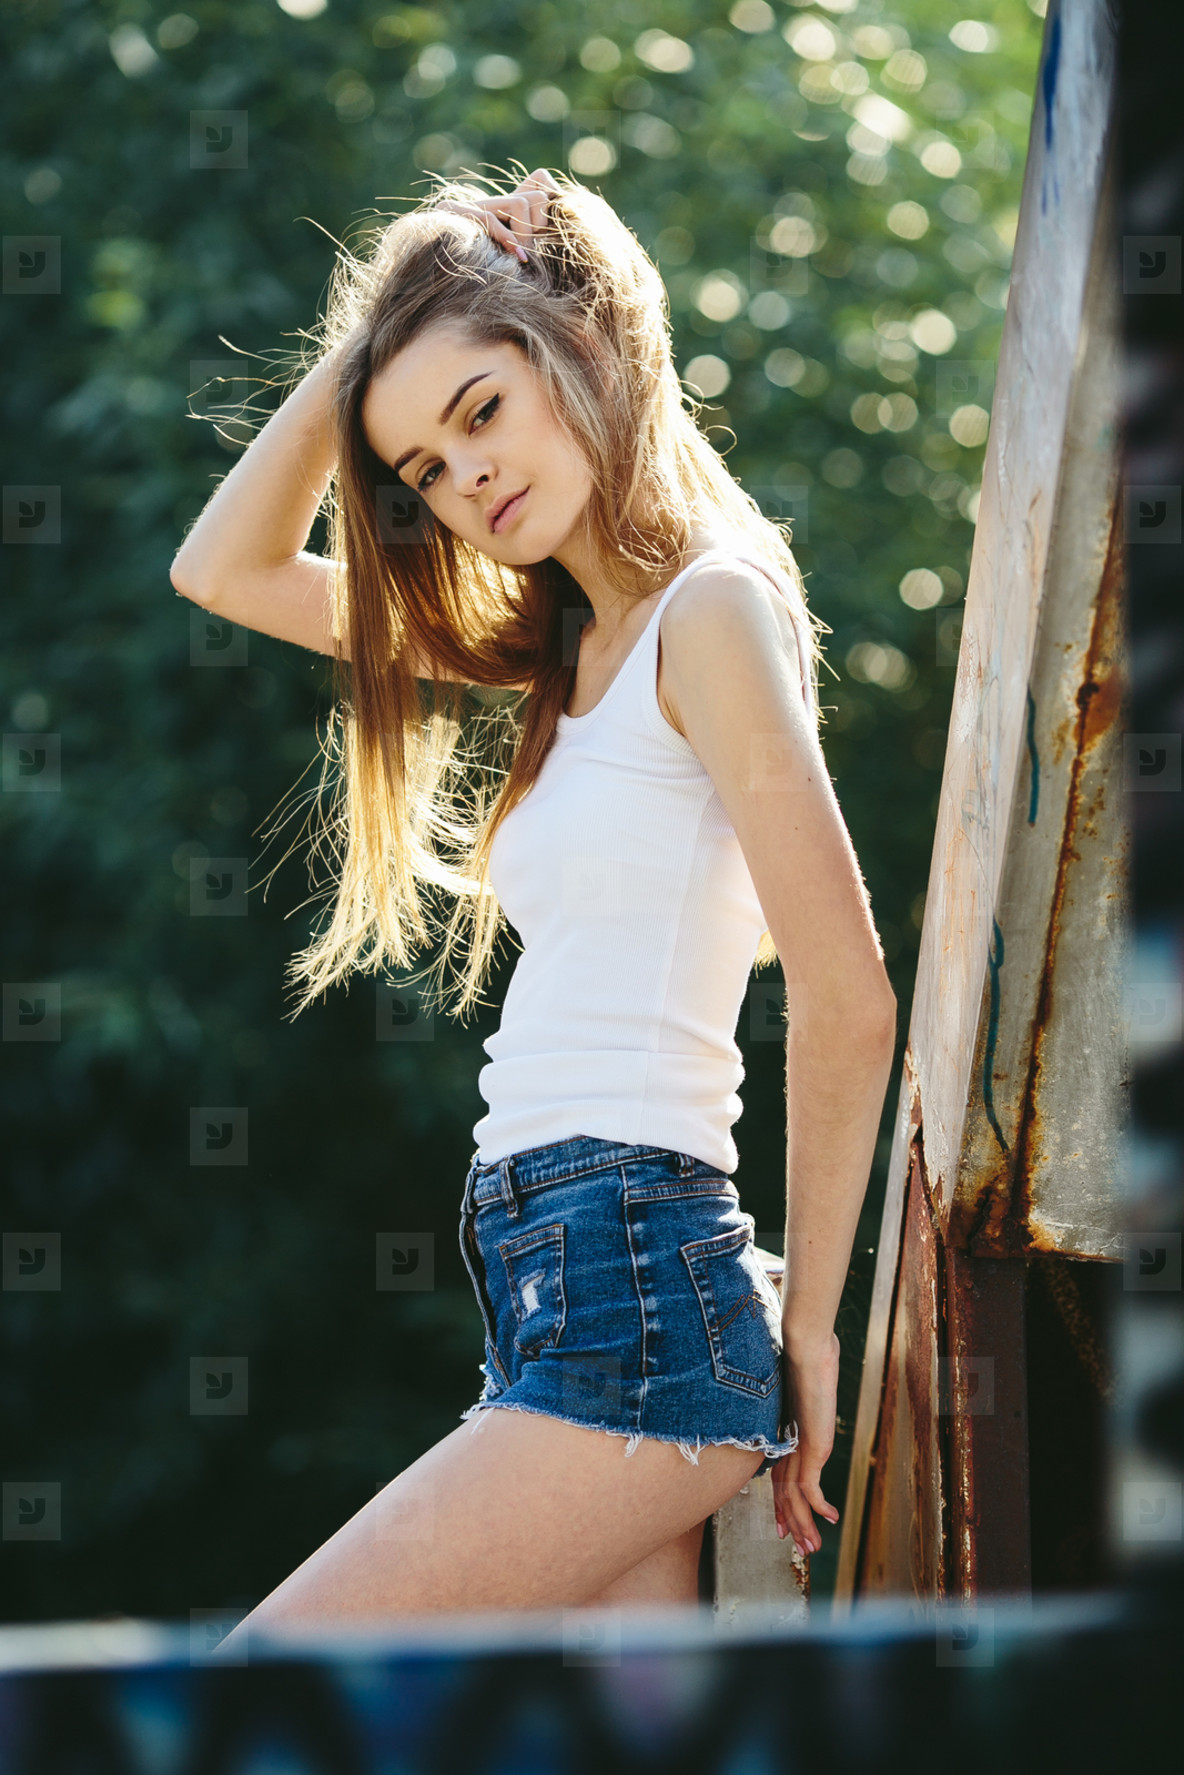 young beautiful girl posing stock photo (153400) picture